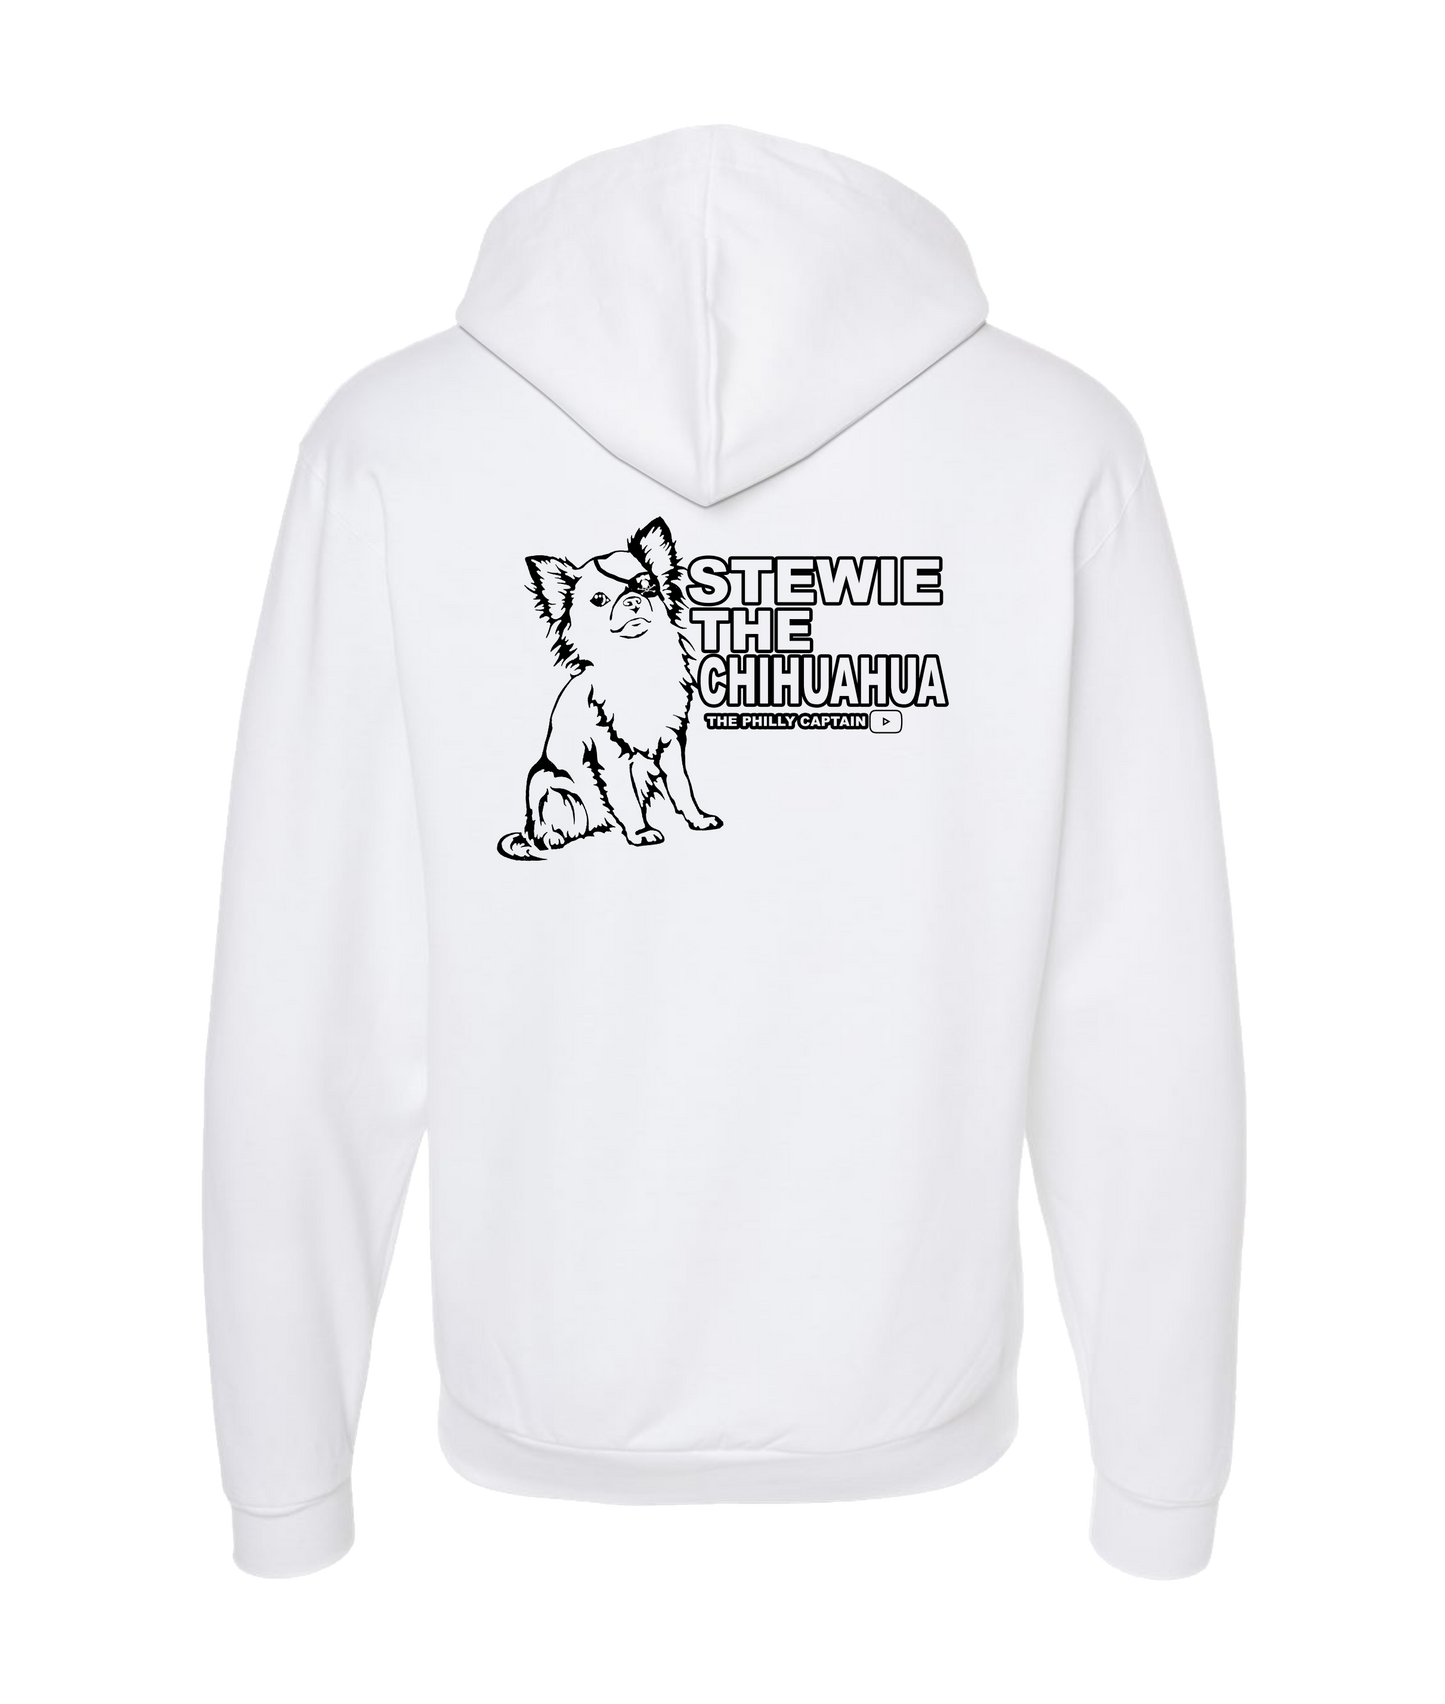 The Philly Captain's Merch is Fire - Stewie the Chihuahua - White Zip Up Hoodie